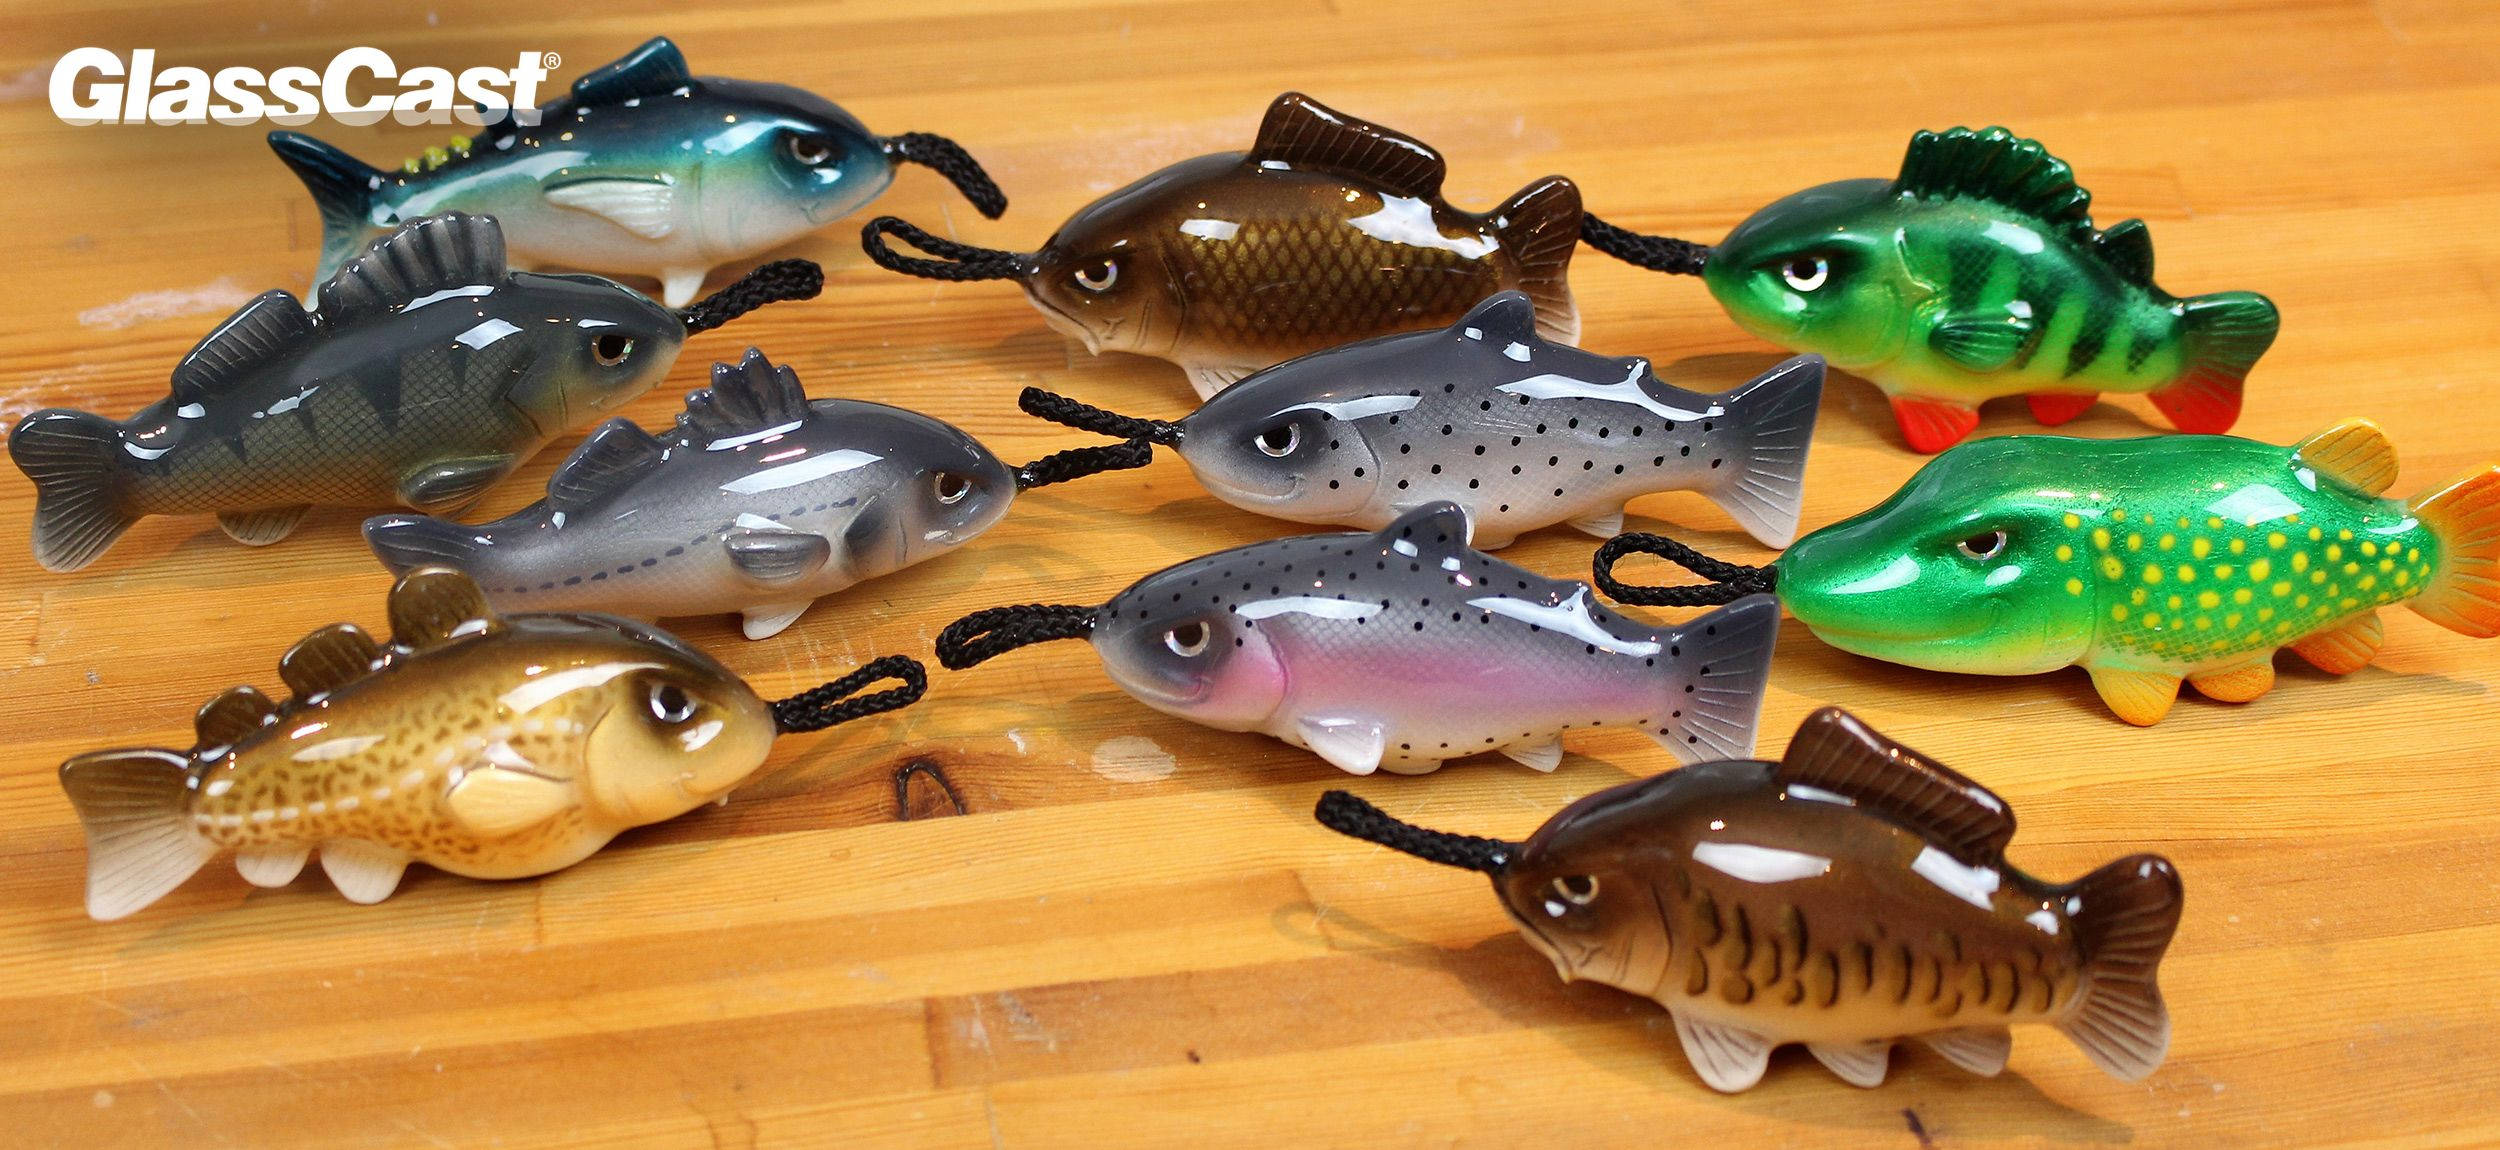 Epoxy Resin Fishing Lures - GlassCast